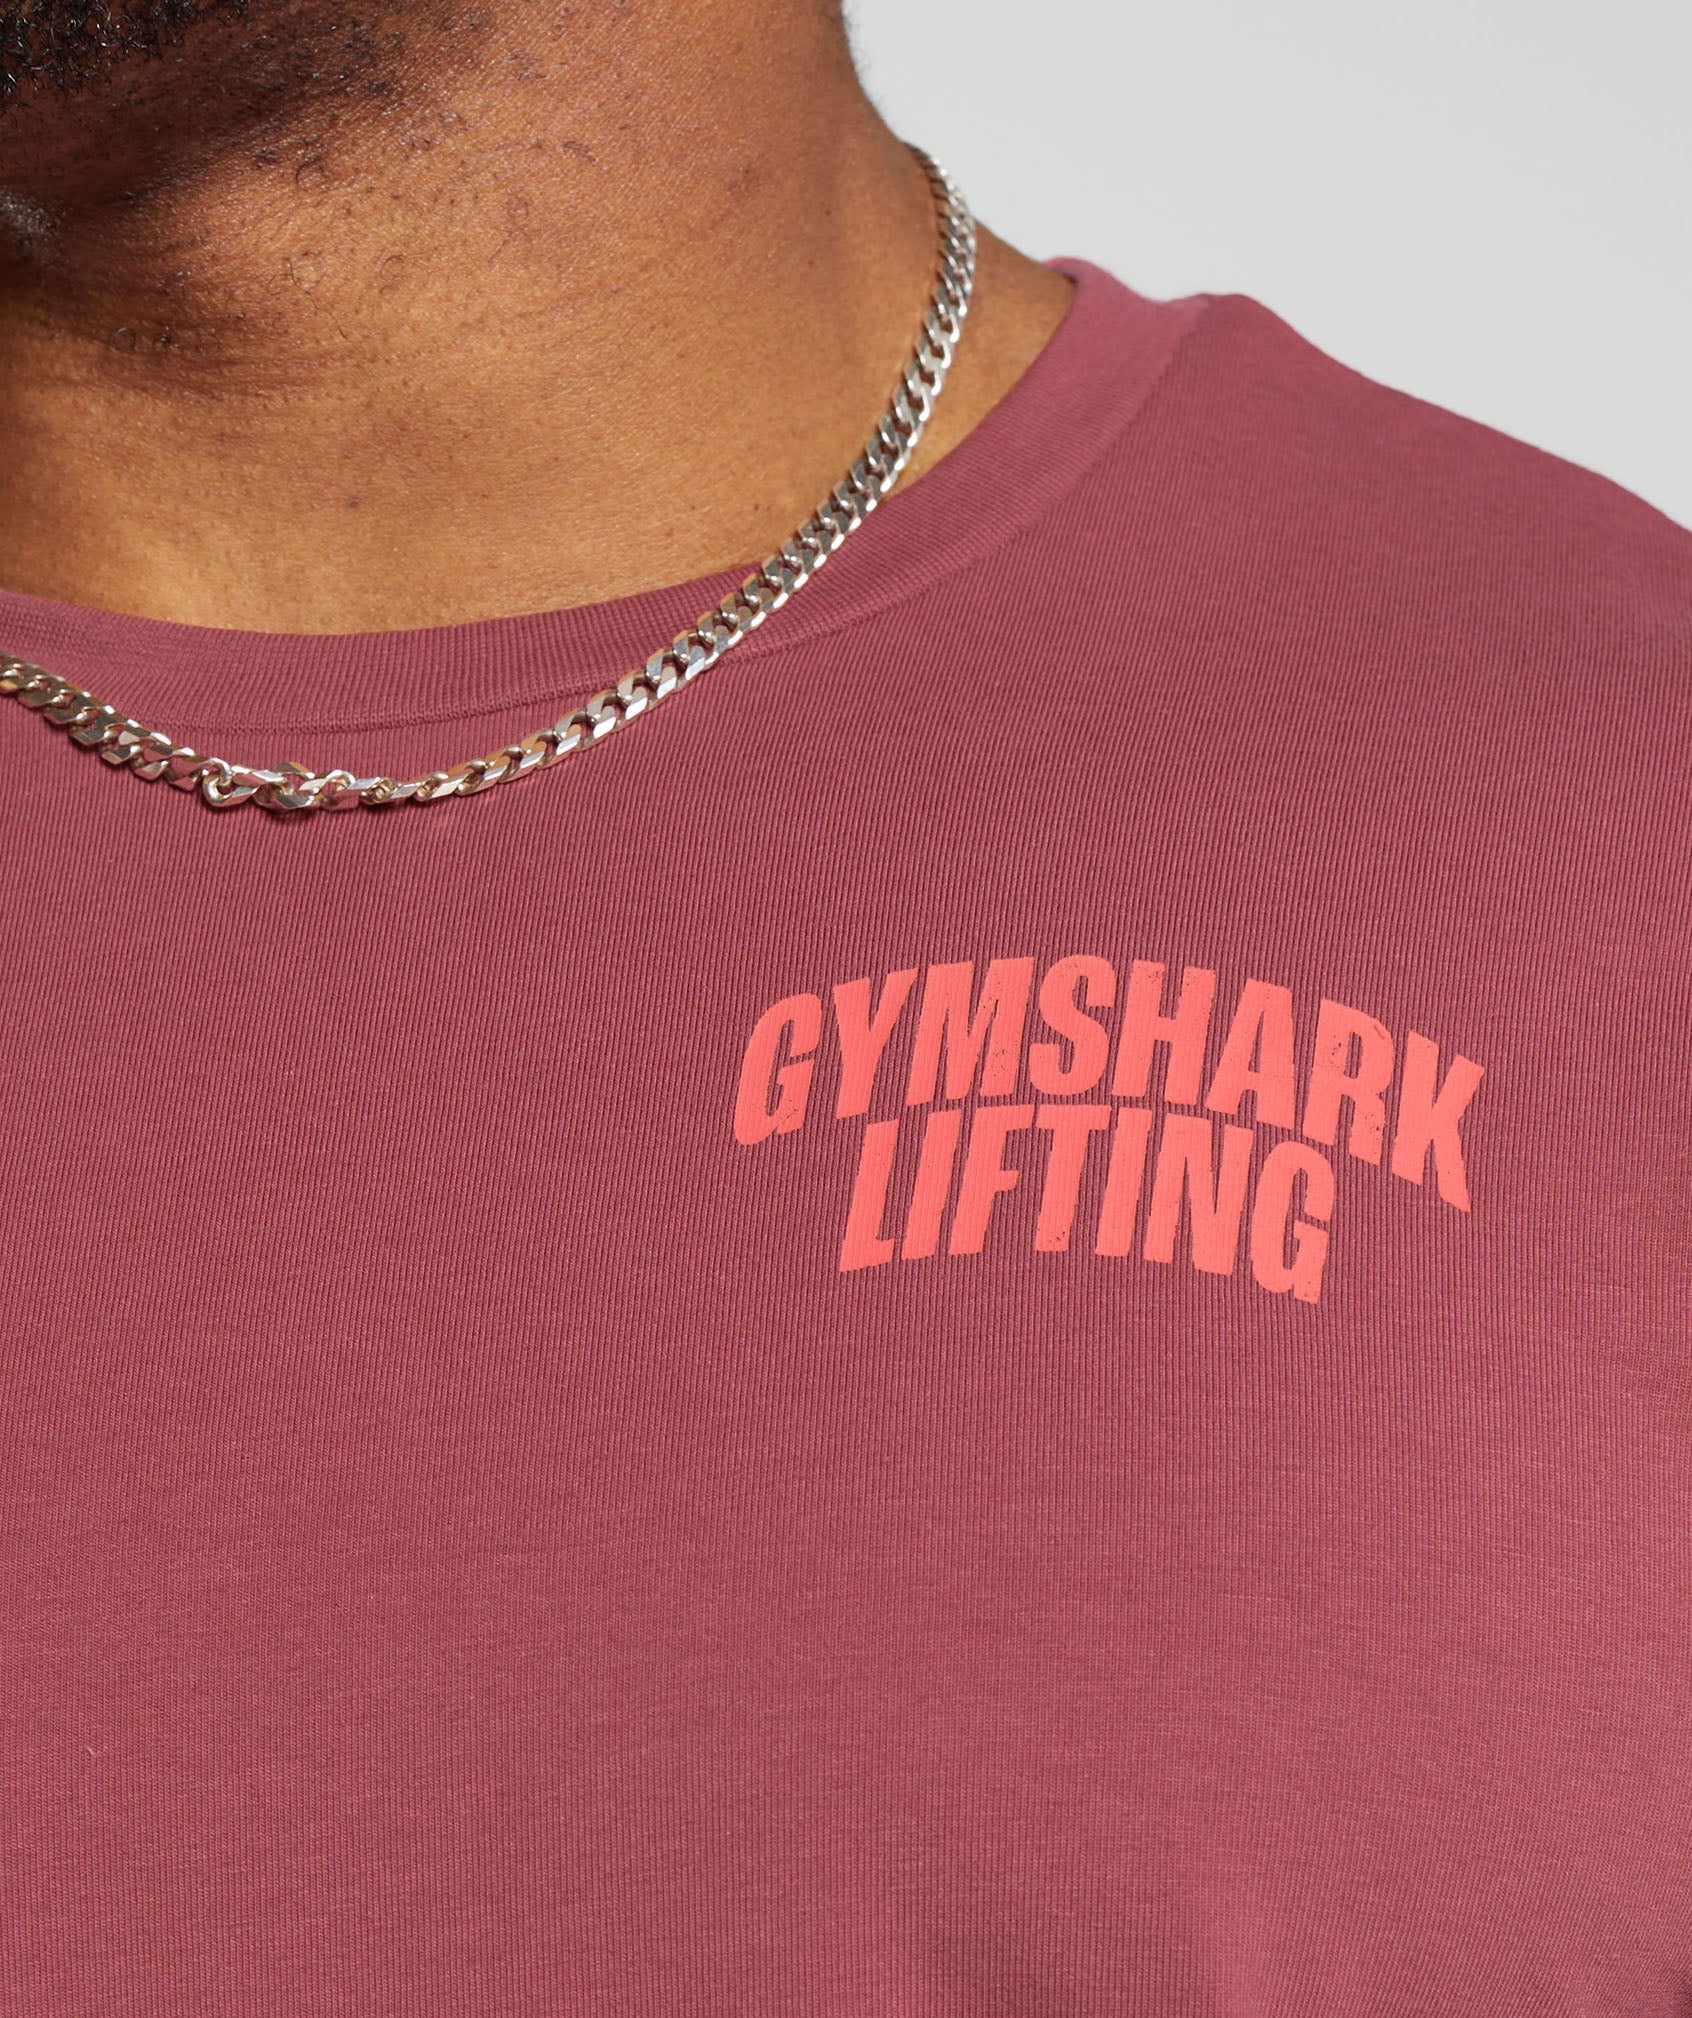 Little things for big lifts 🏋️ - Gymshark.com